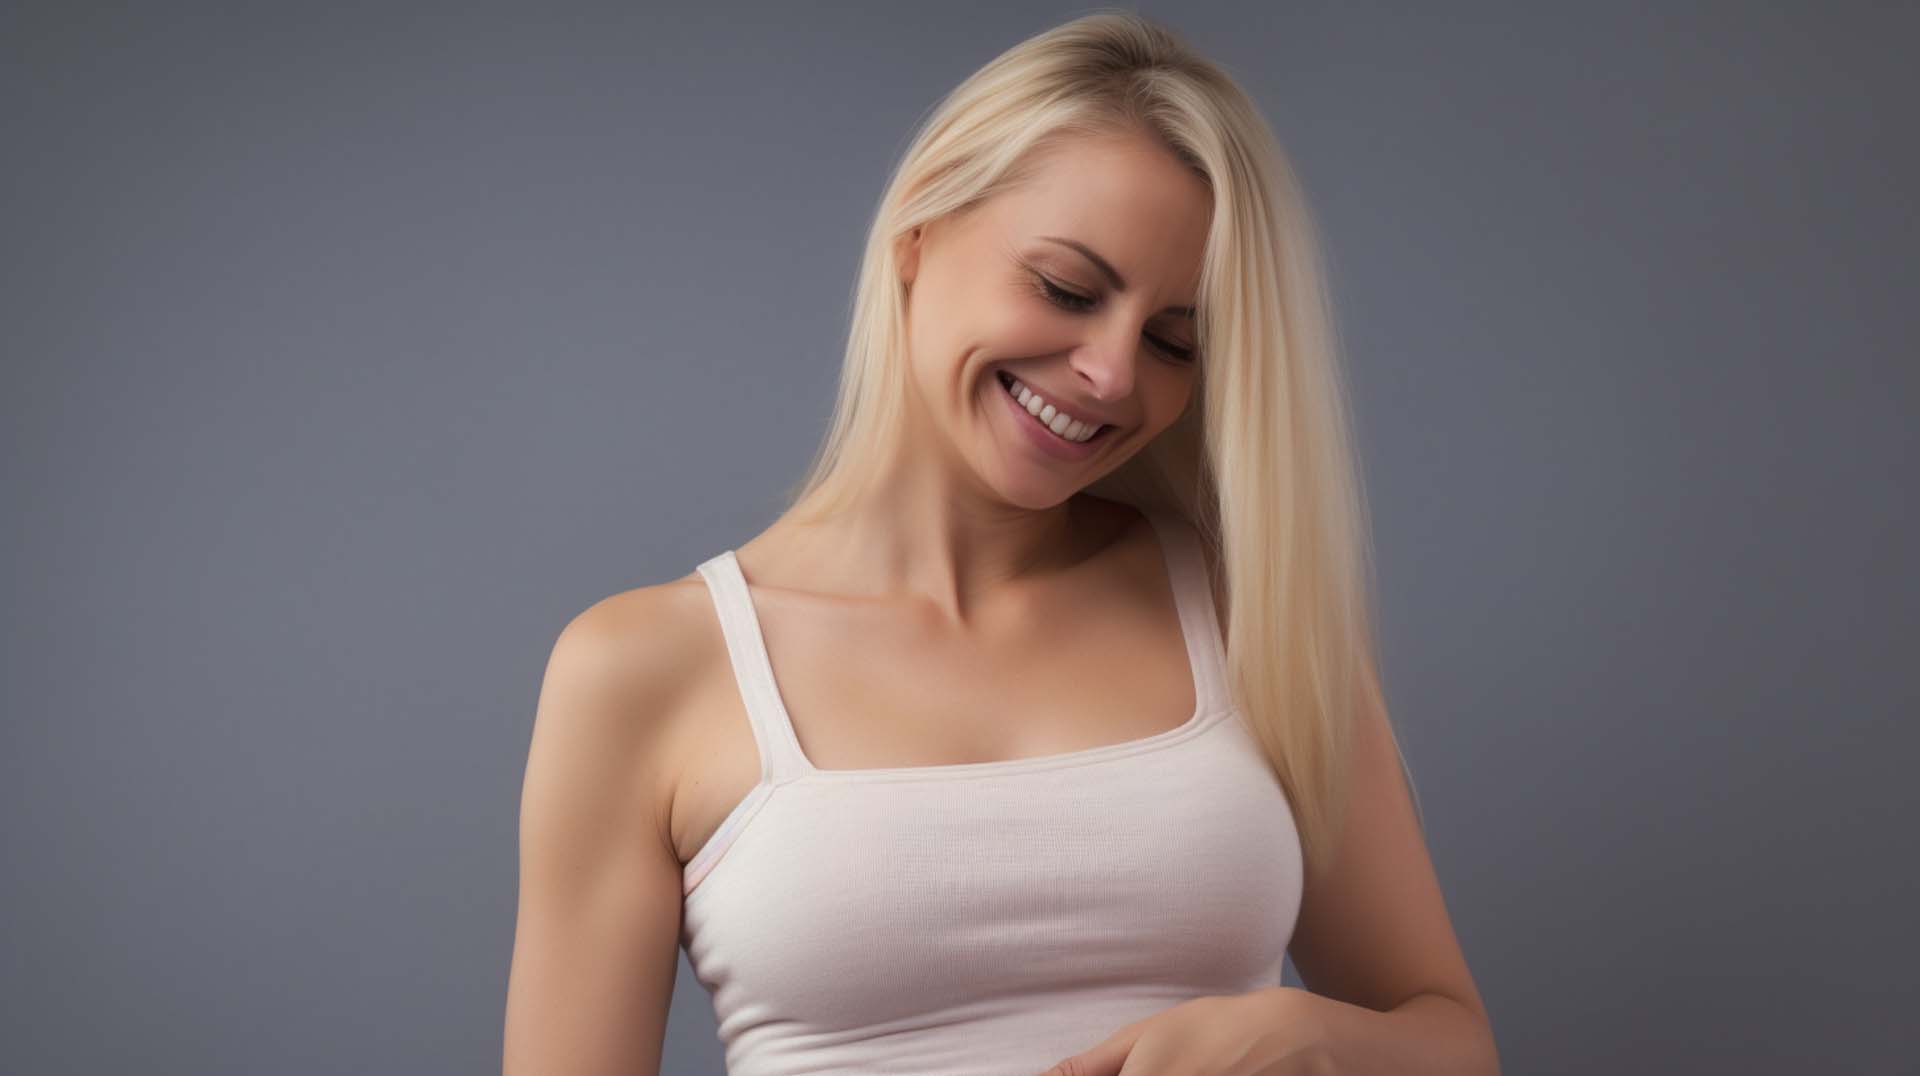 Tummy Tuck Before and After Photos in New Hamburg